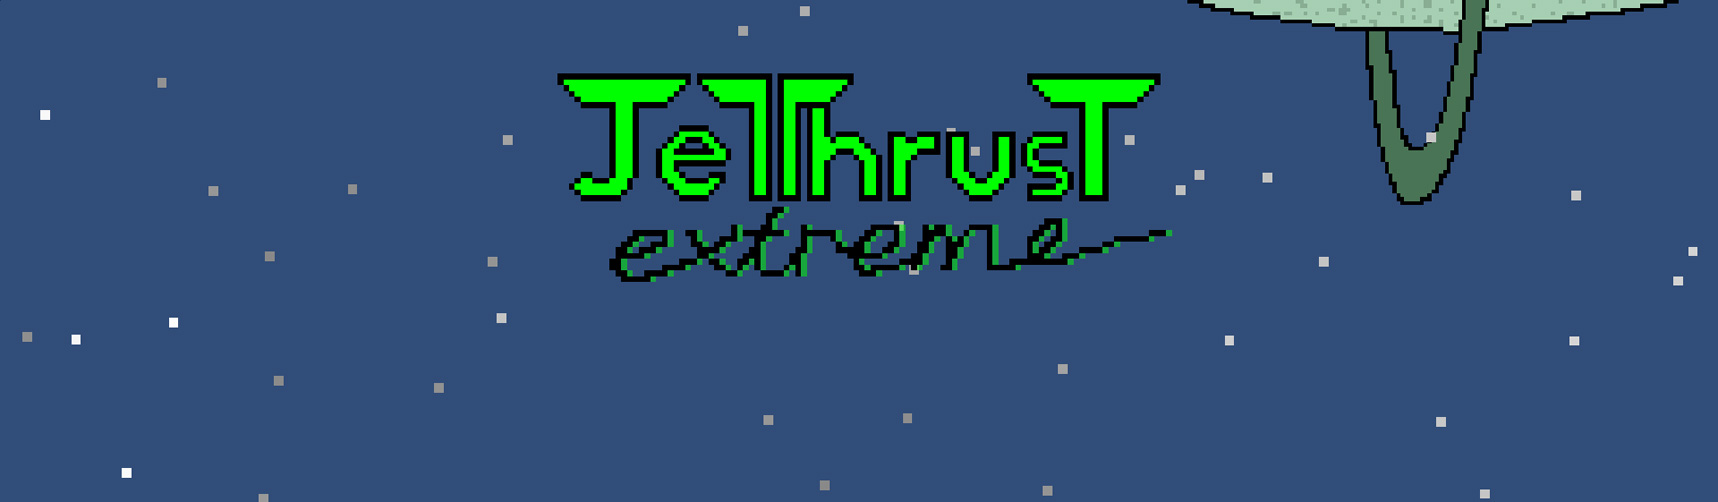 Pixel art image of space with Jet Thrust logo on